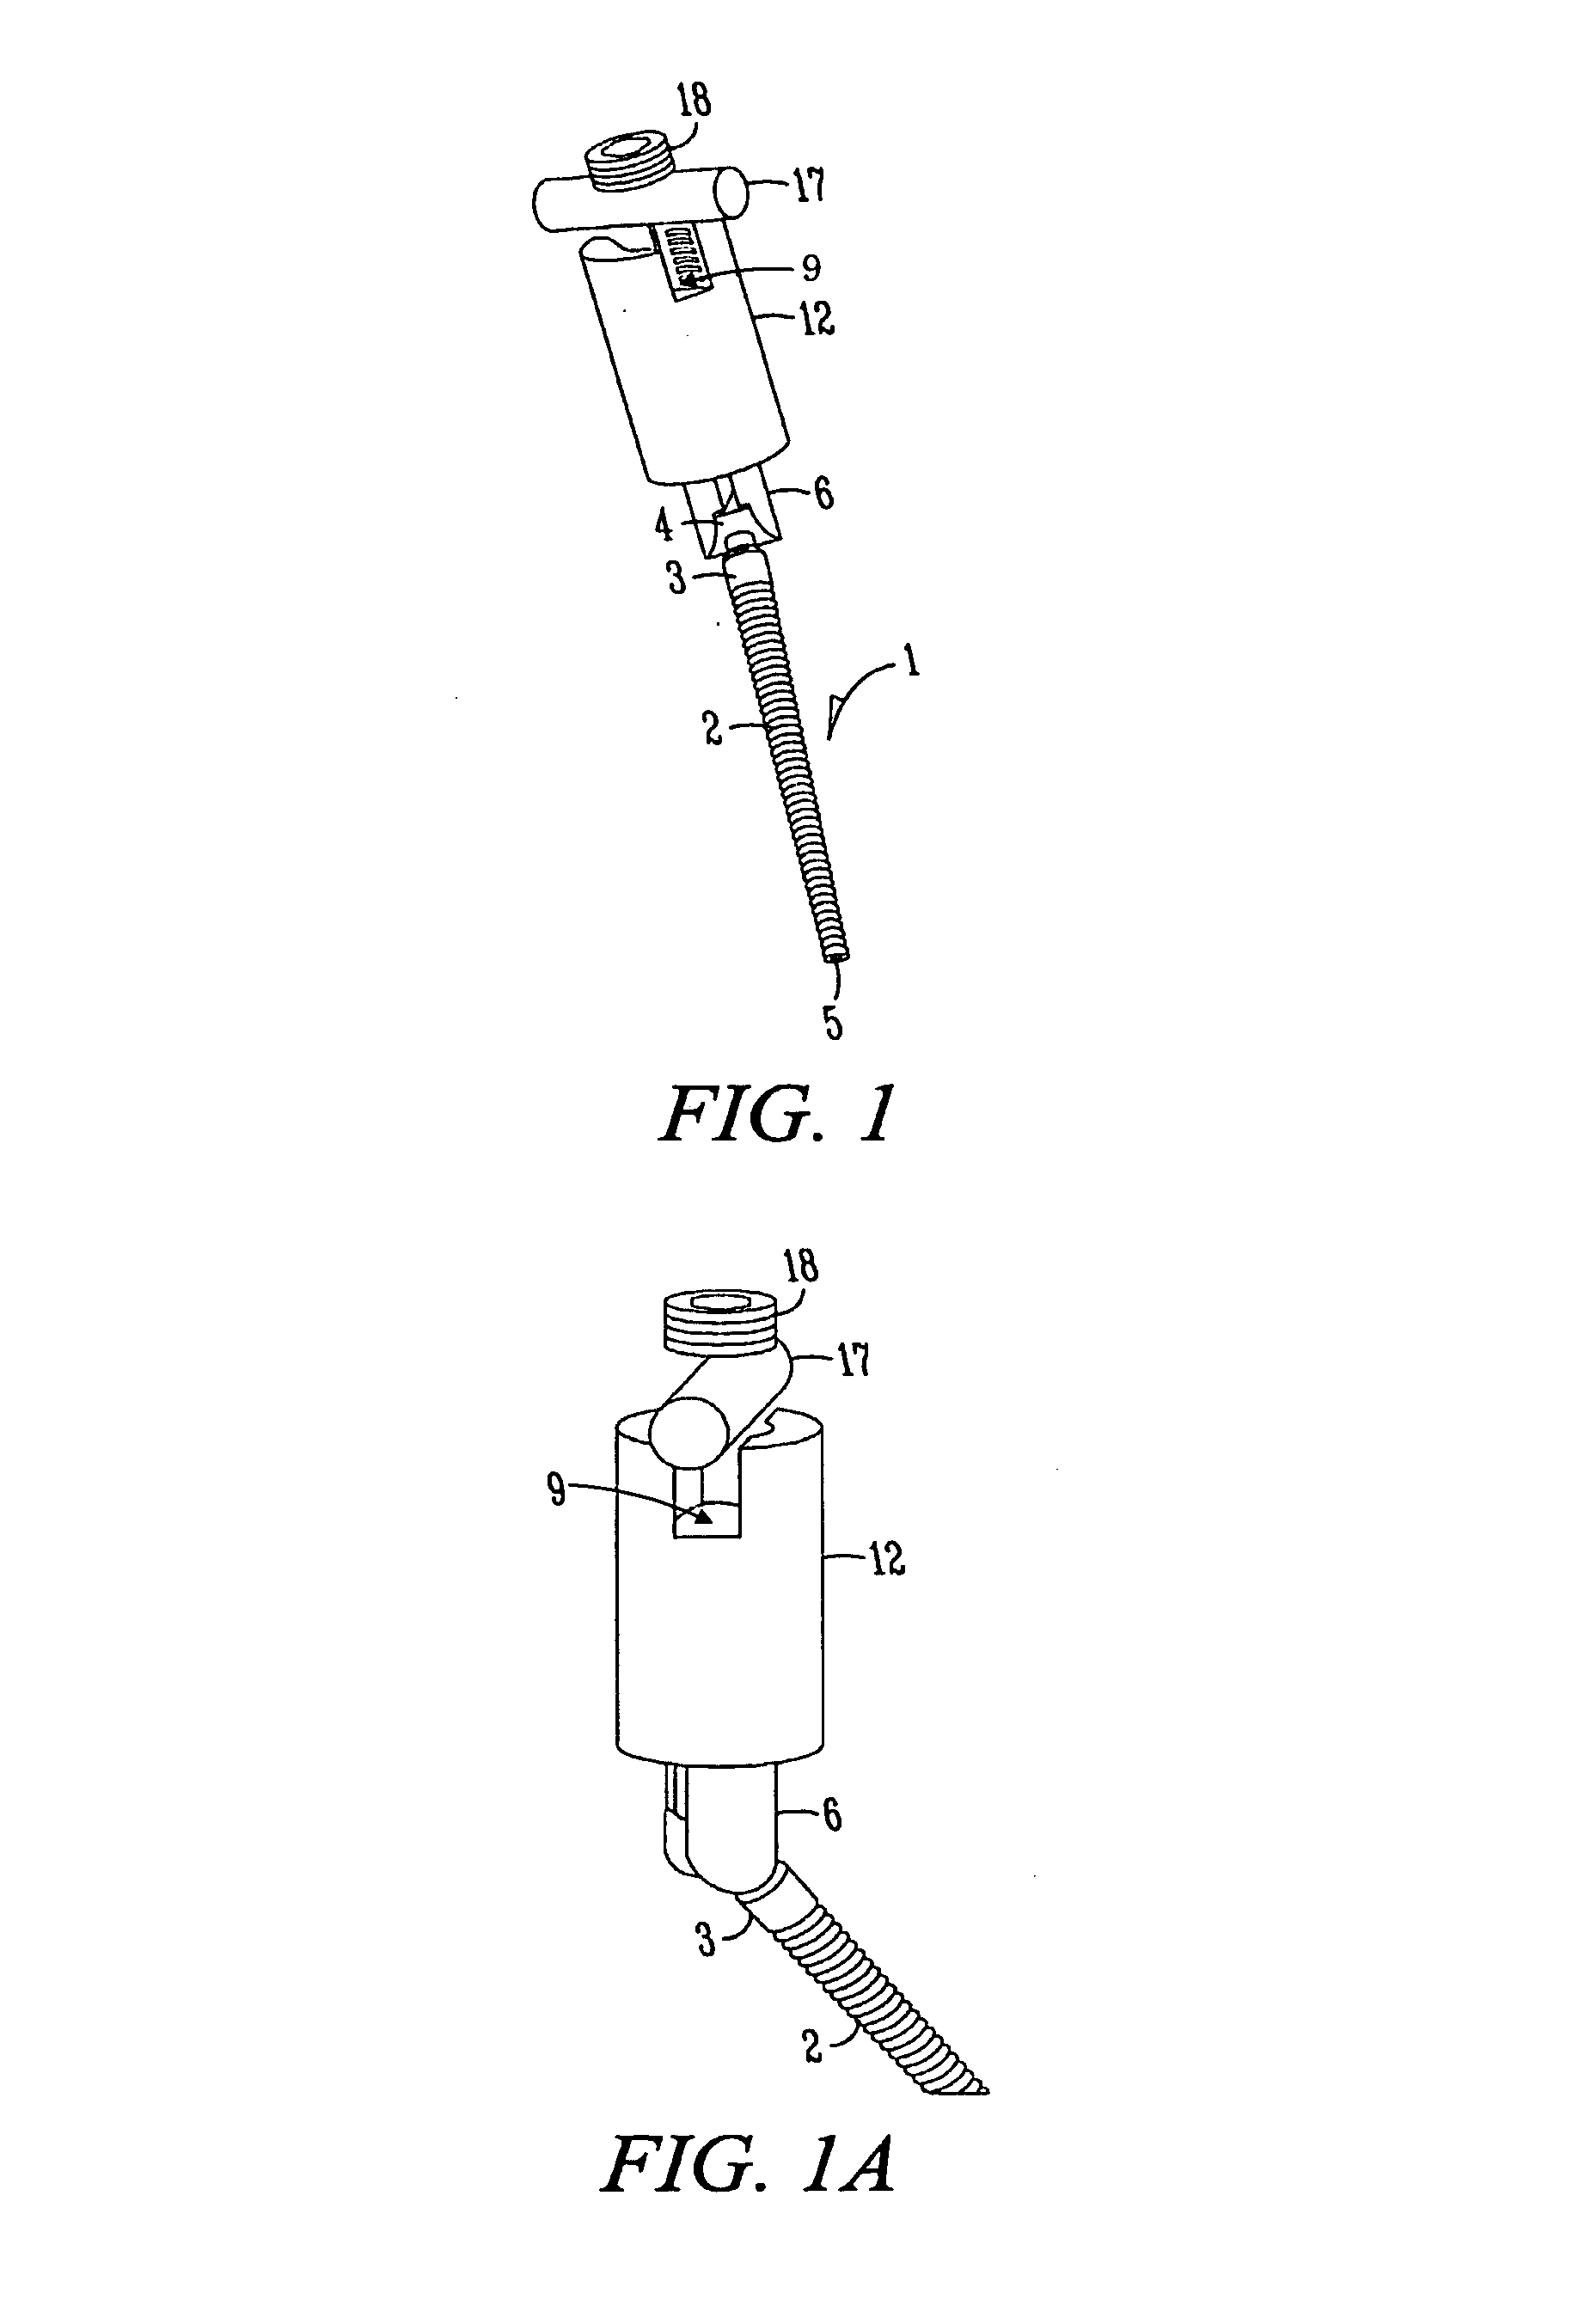 Pedicle screw with vertical adjustment